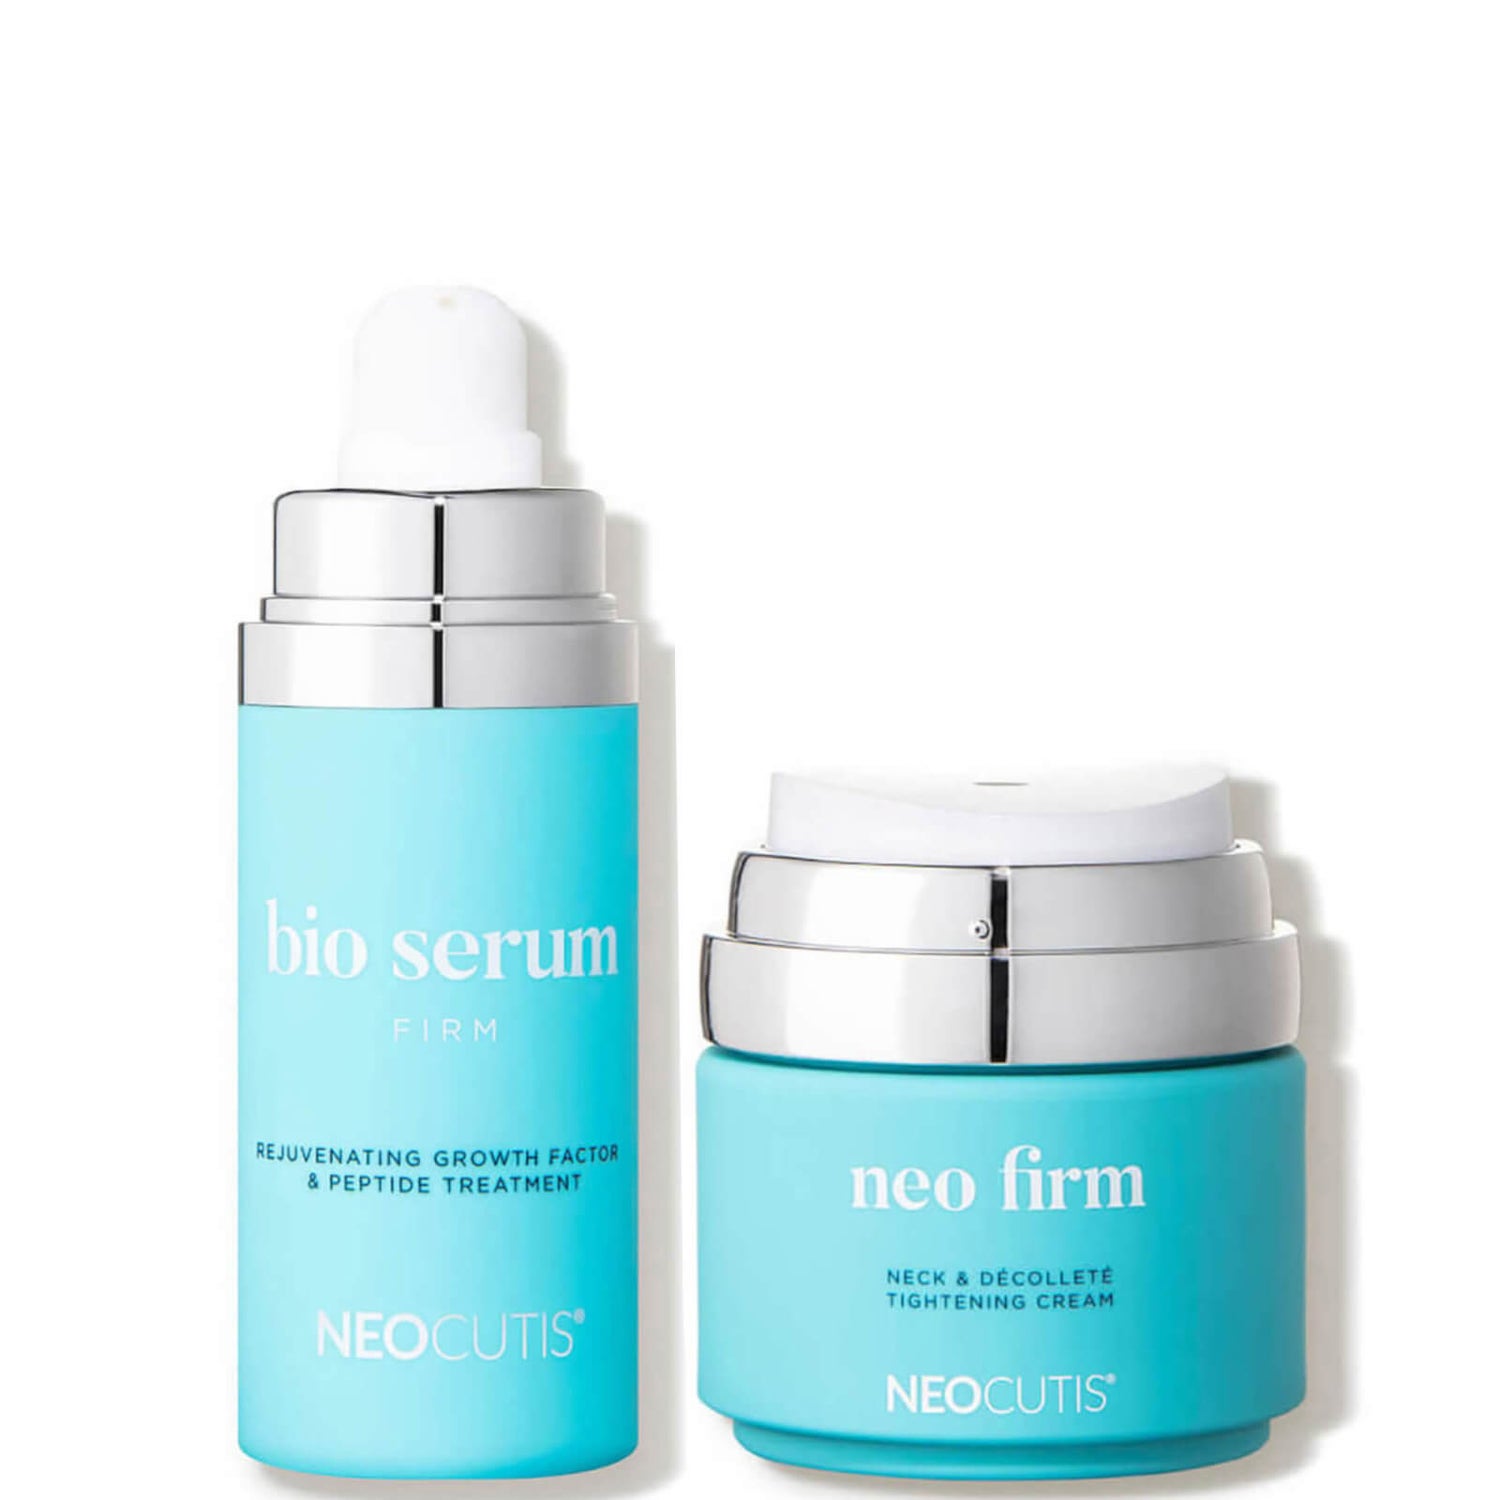 Neocutis Exclusive Firming Neck and Serum Duo (Worth $410.00)